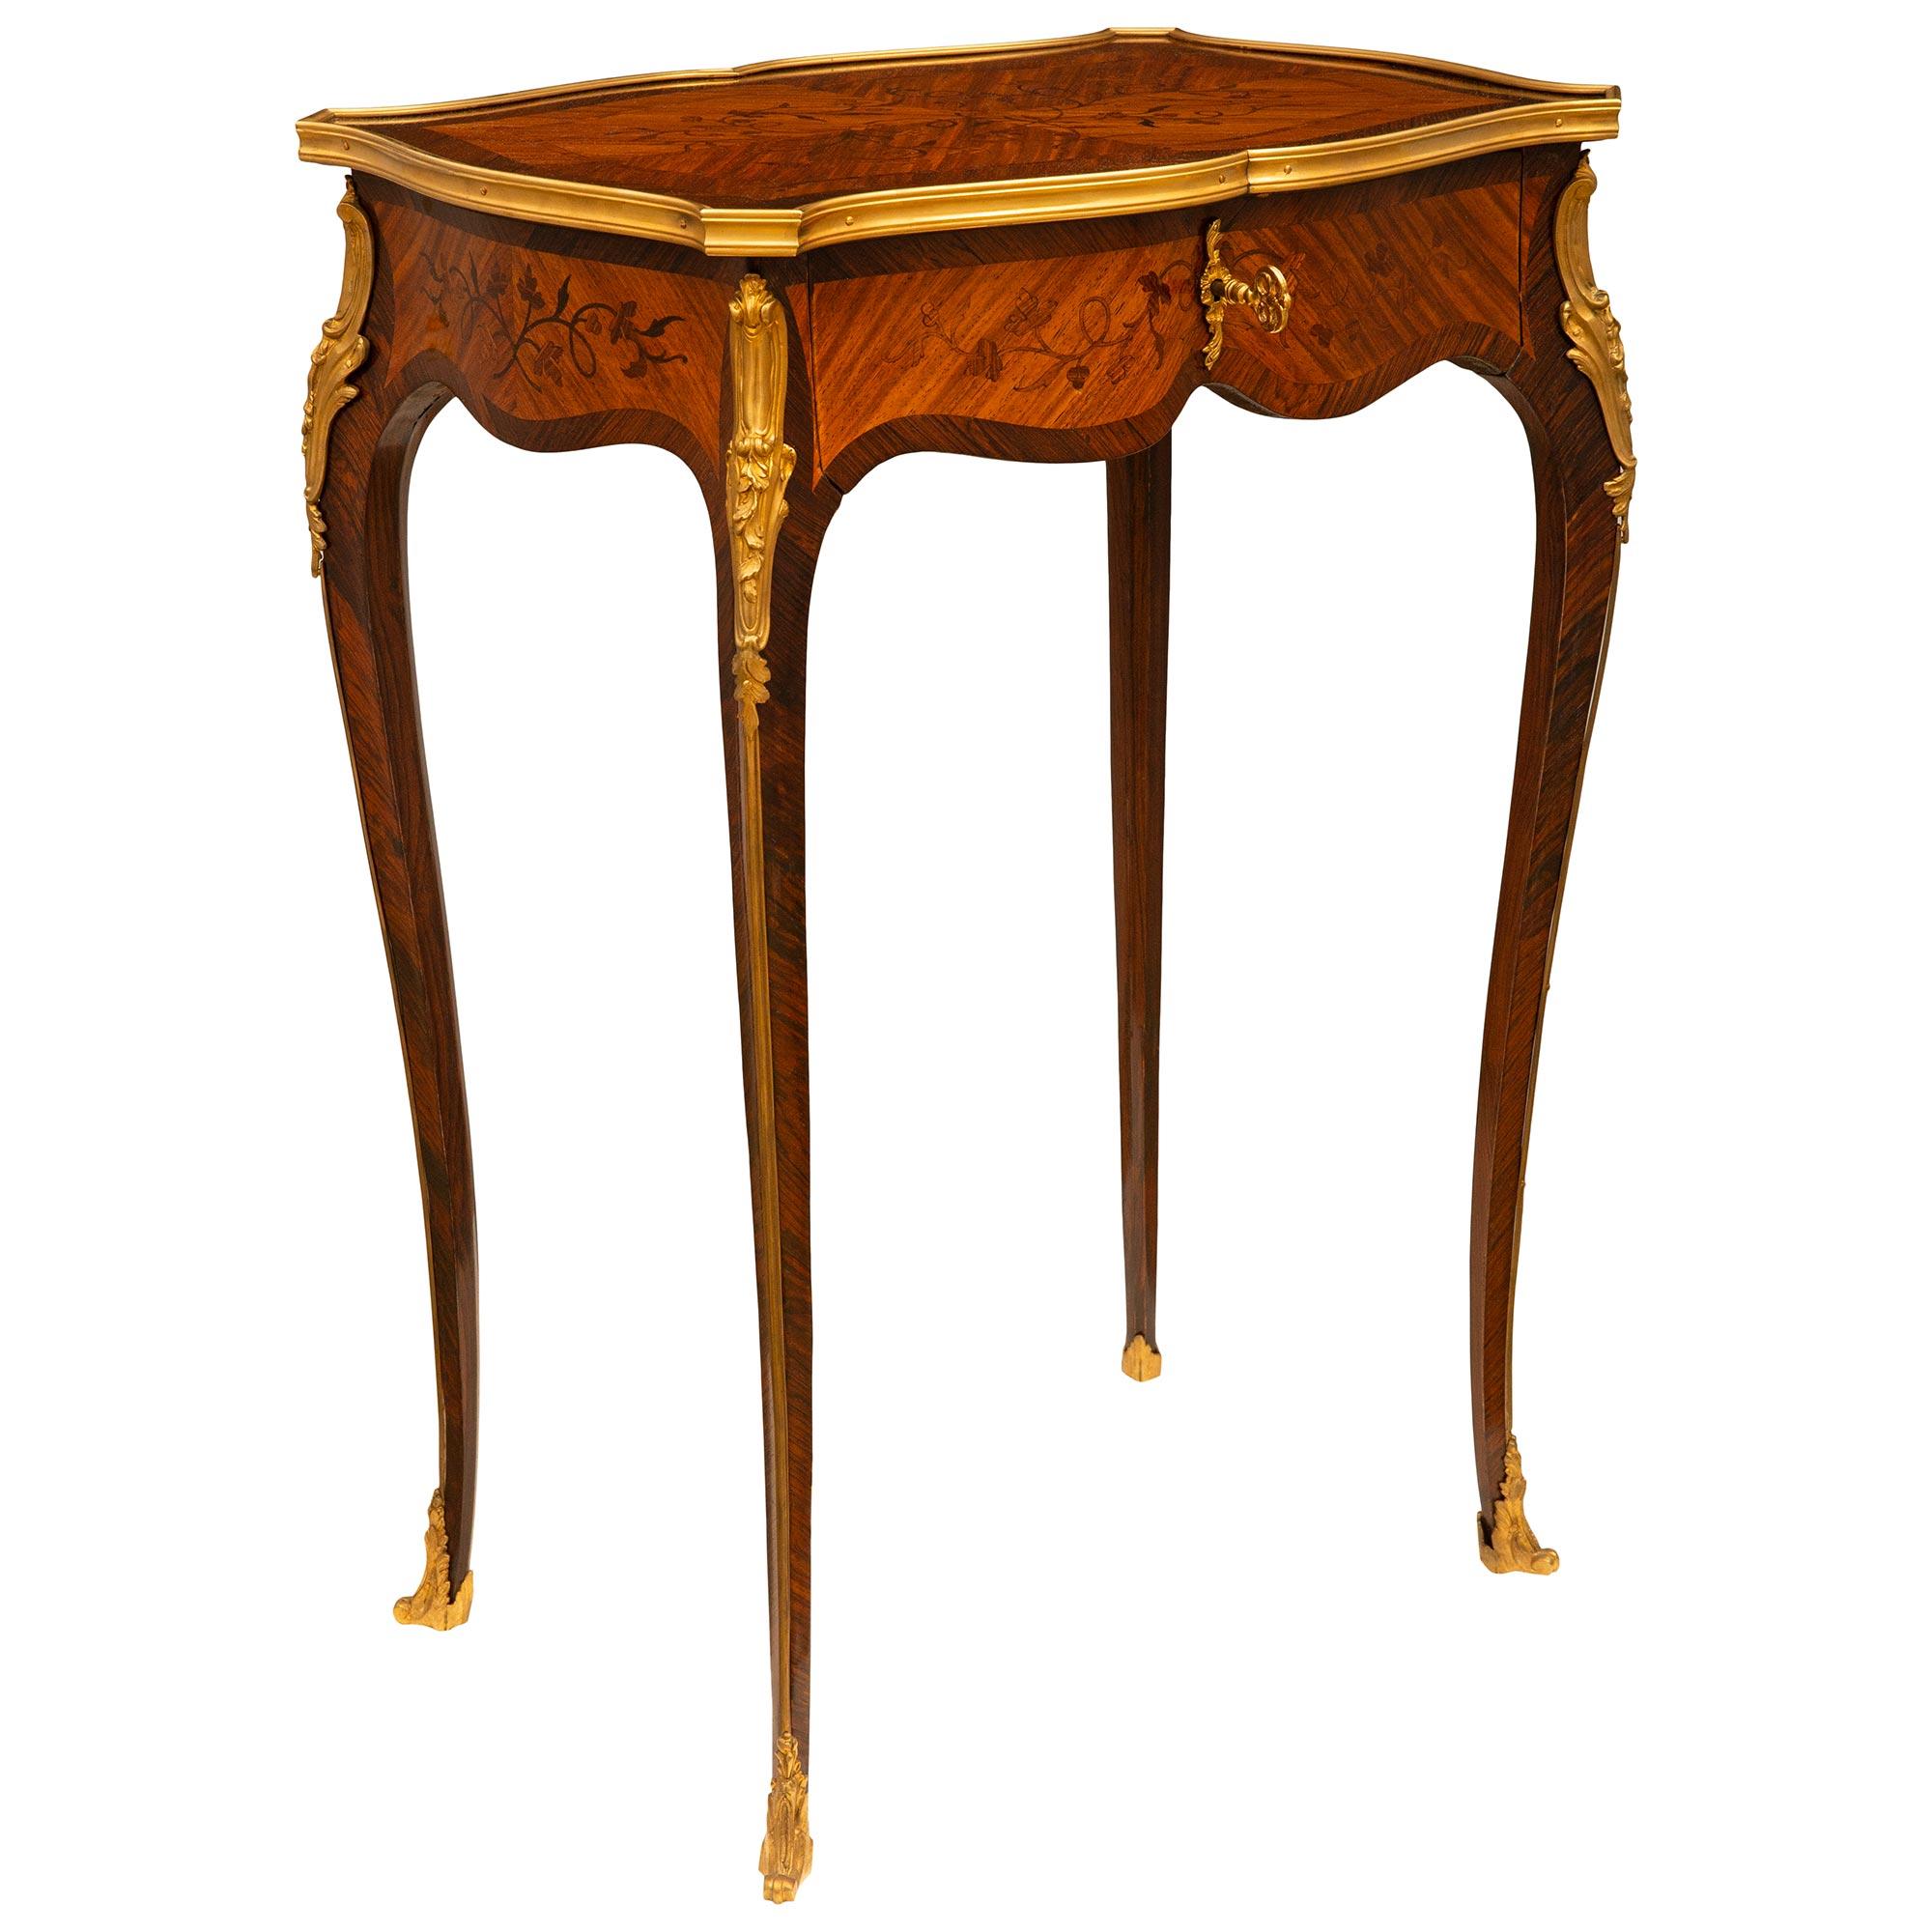  French 19th Century Louis XV Style Kingwood Side Table In Good Condition For Sale In West Palm Beach, FL